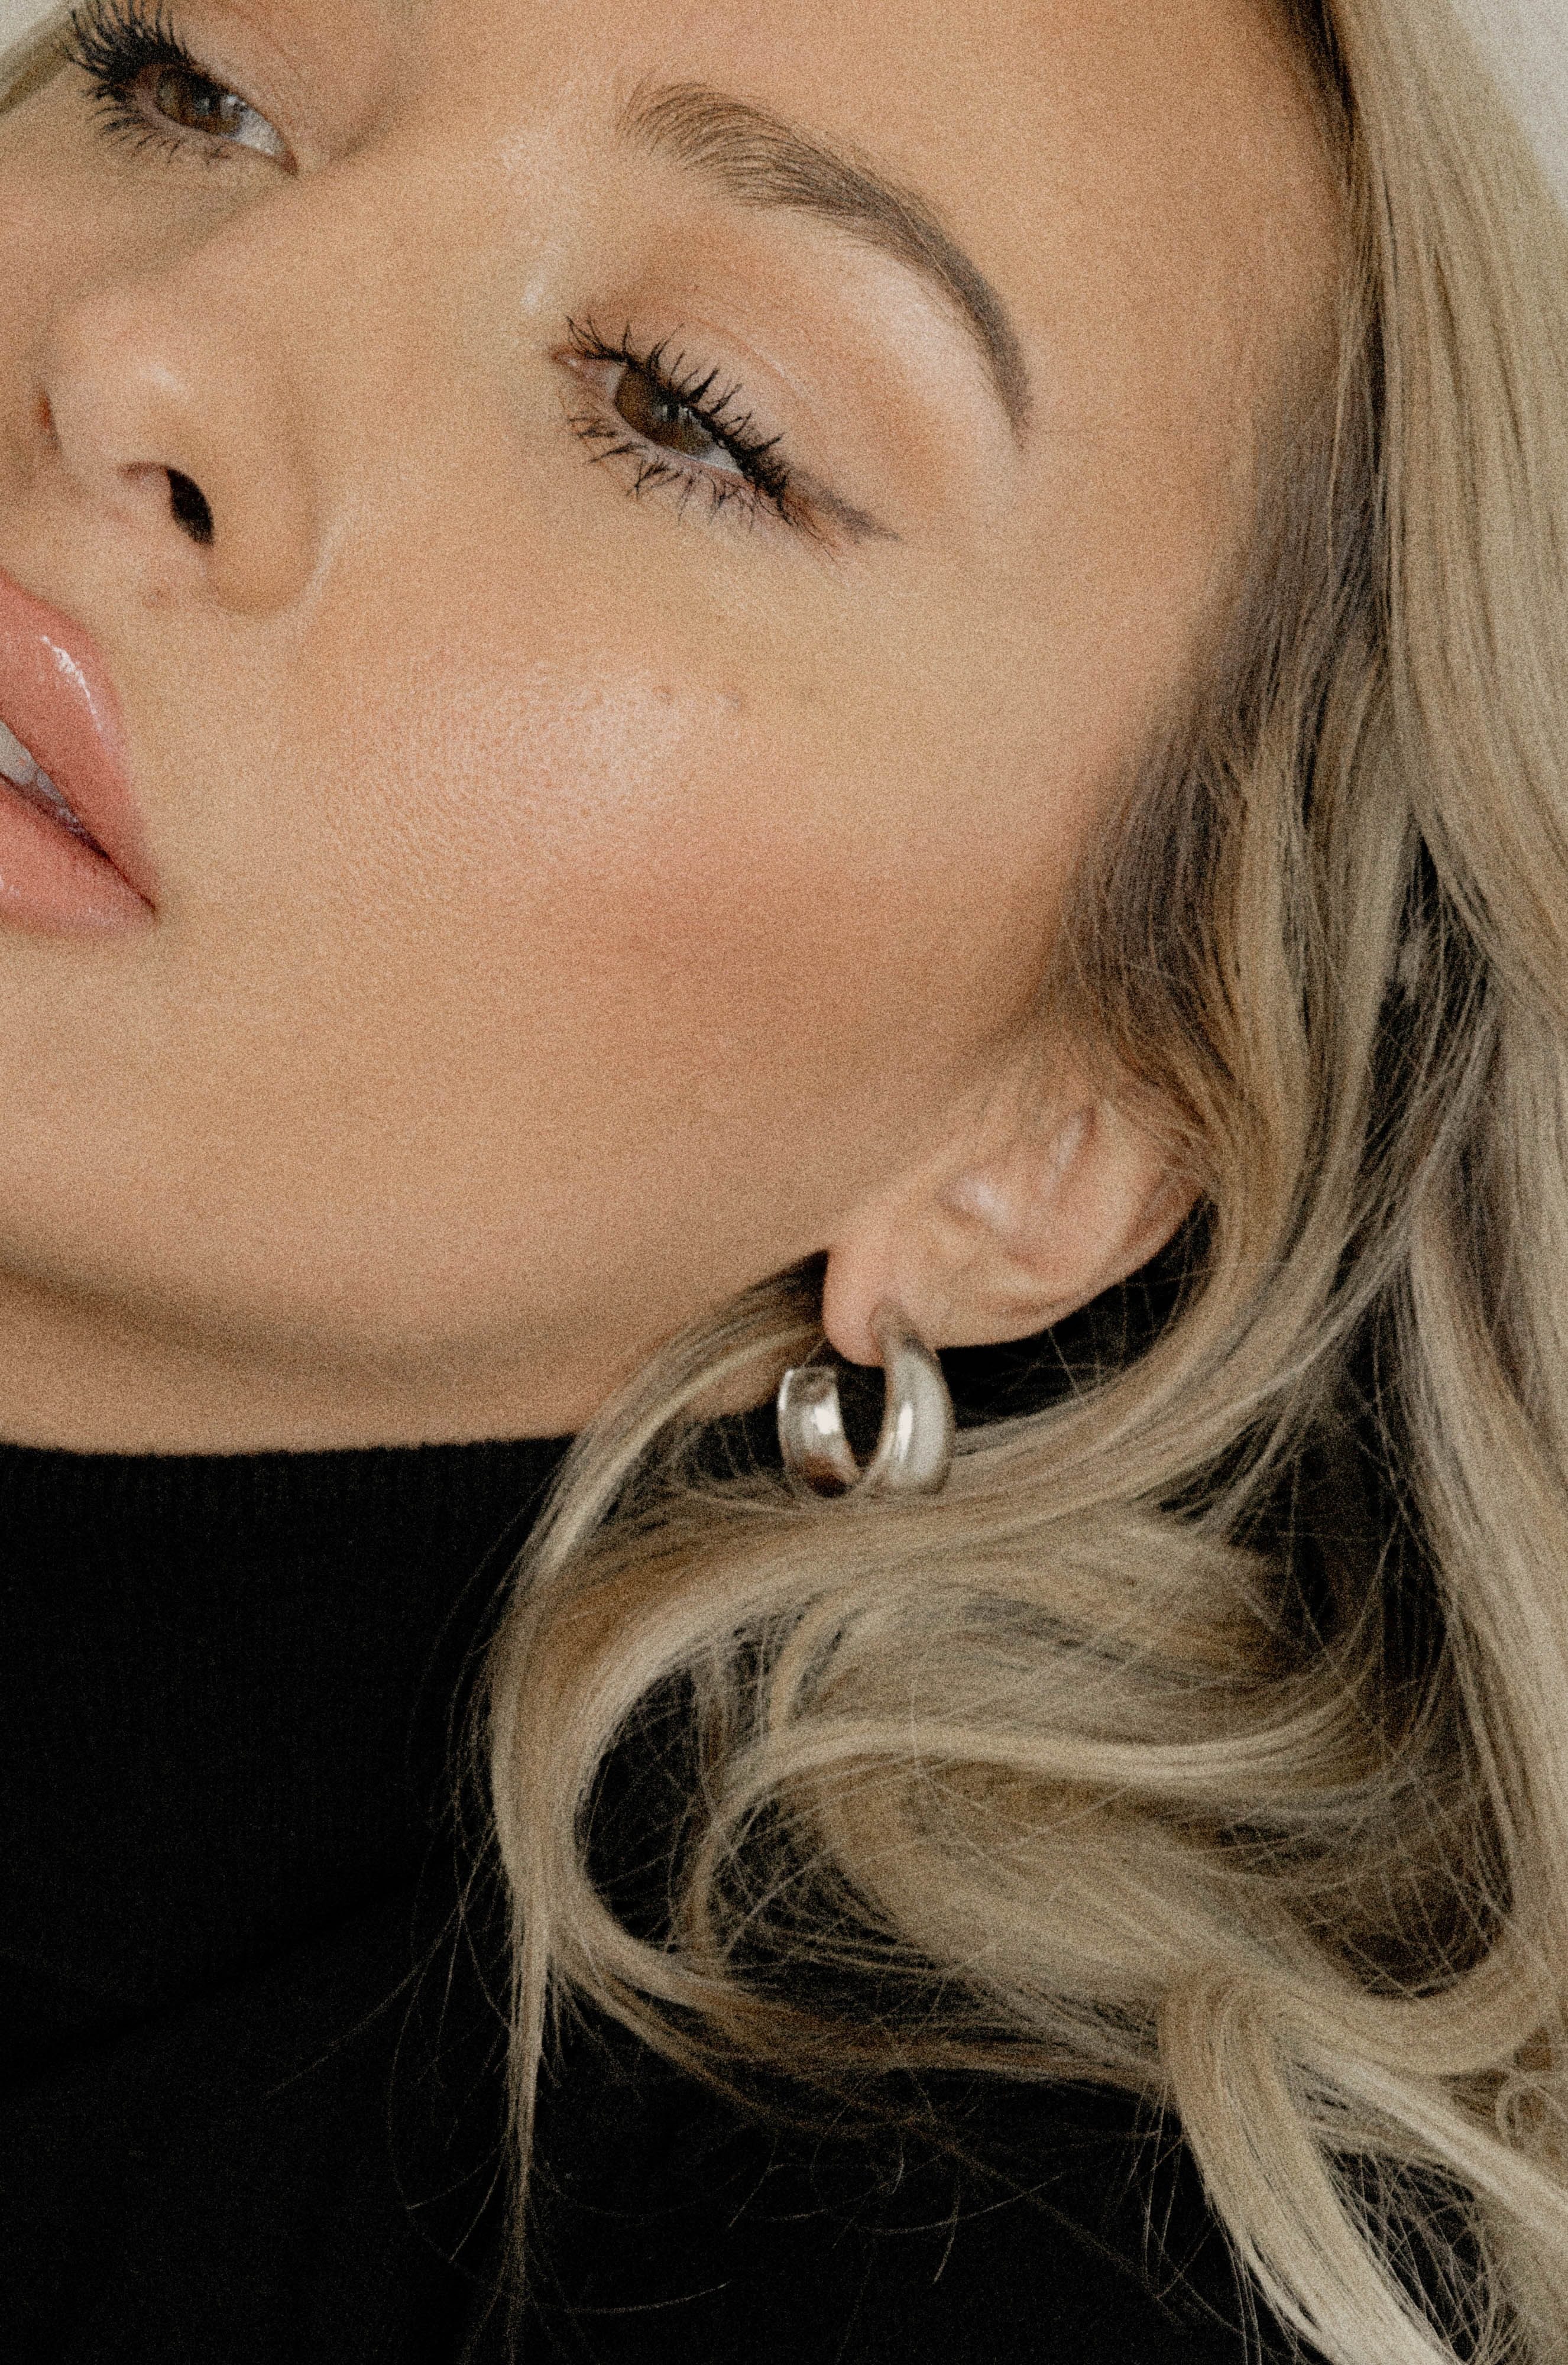 Statement Sterling Silver Hoops